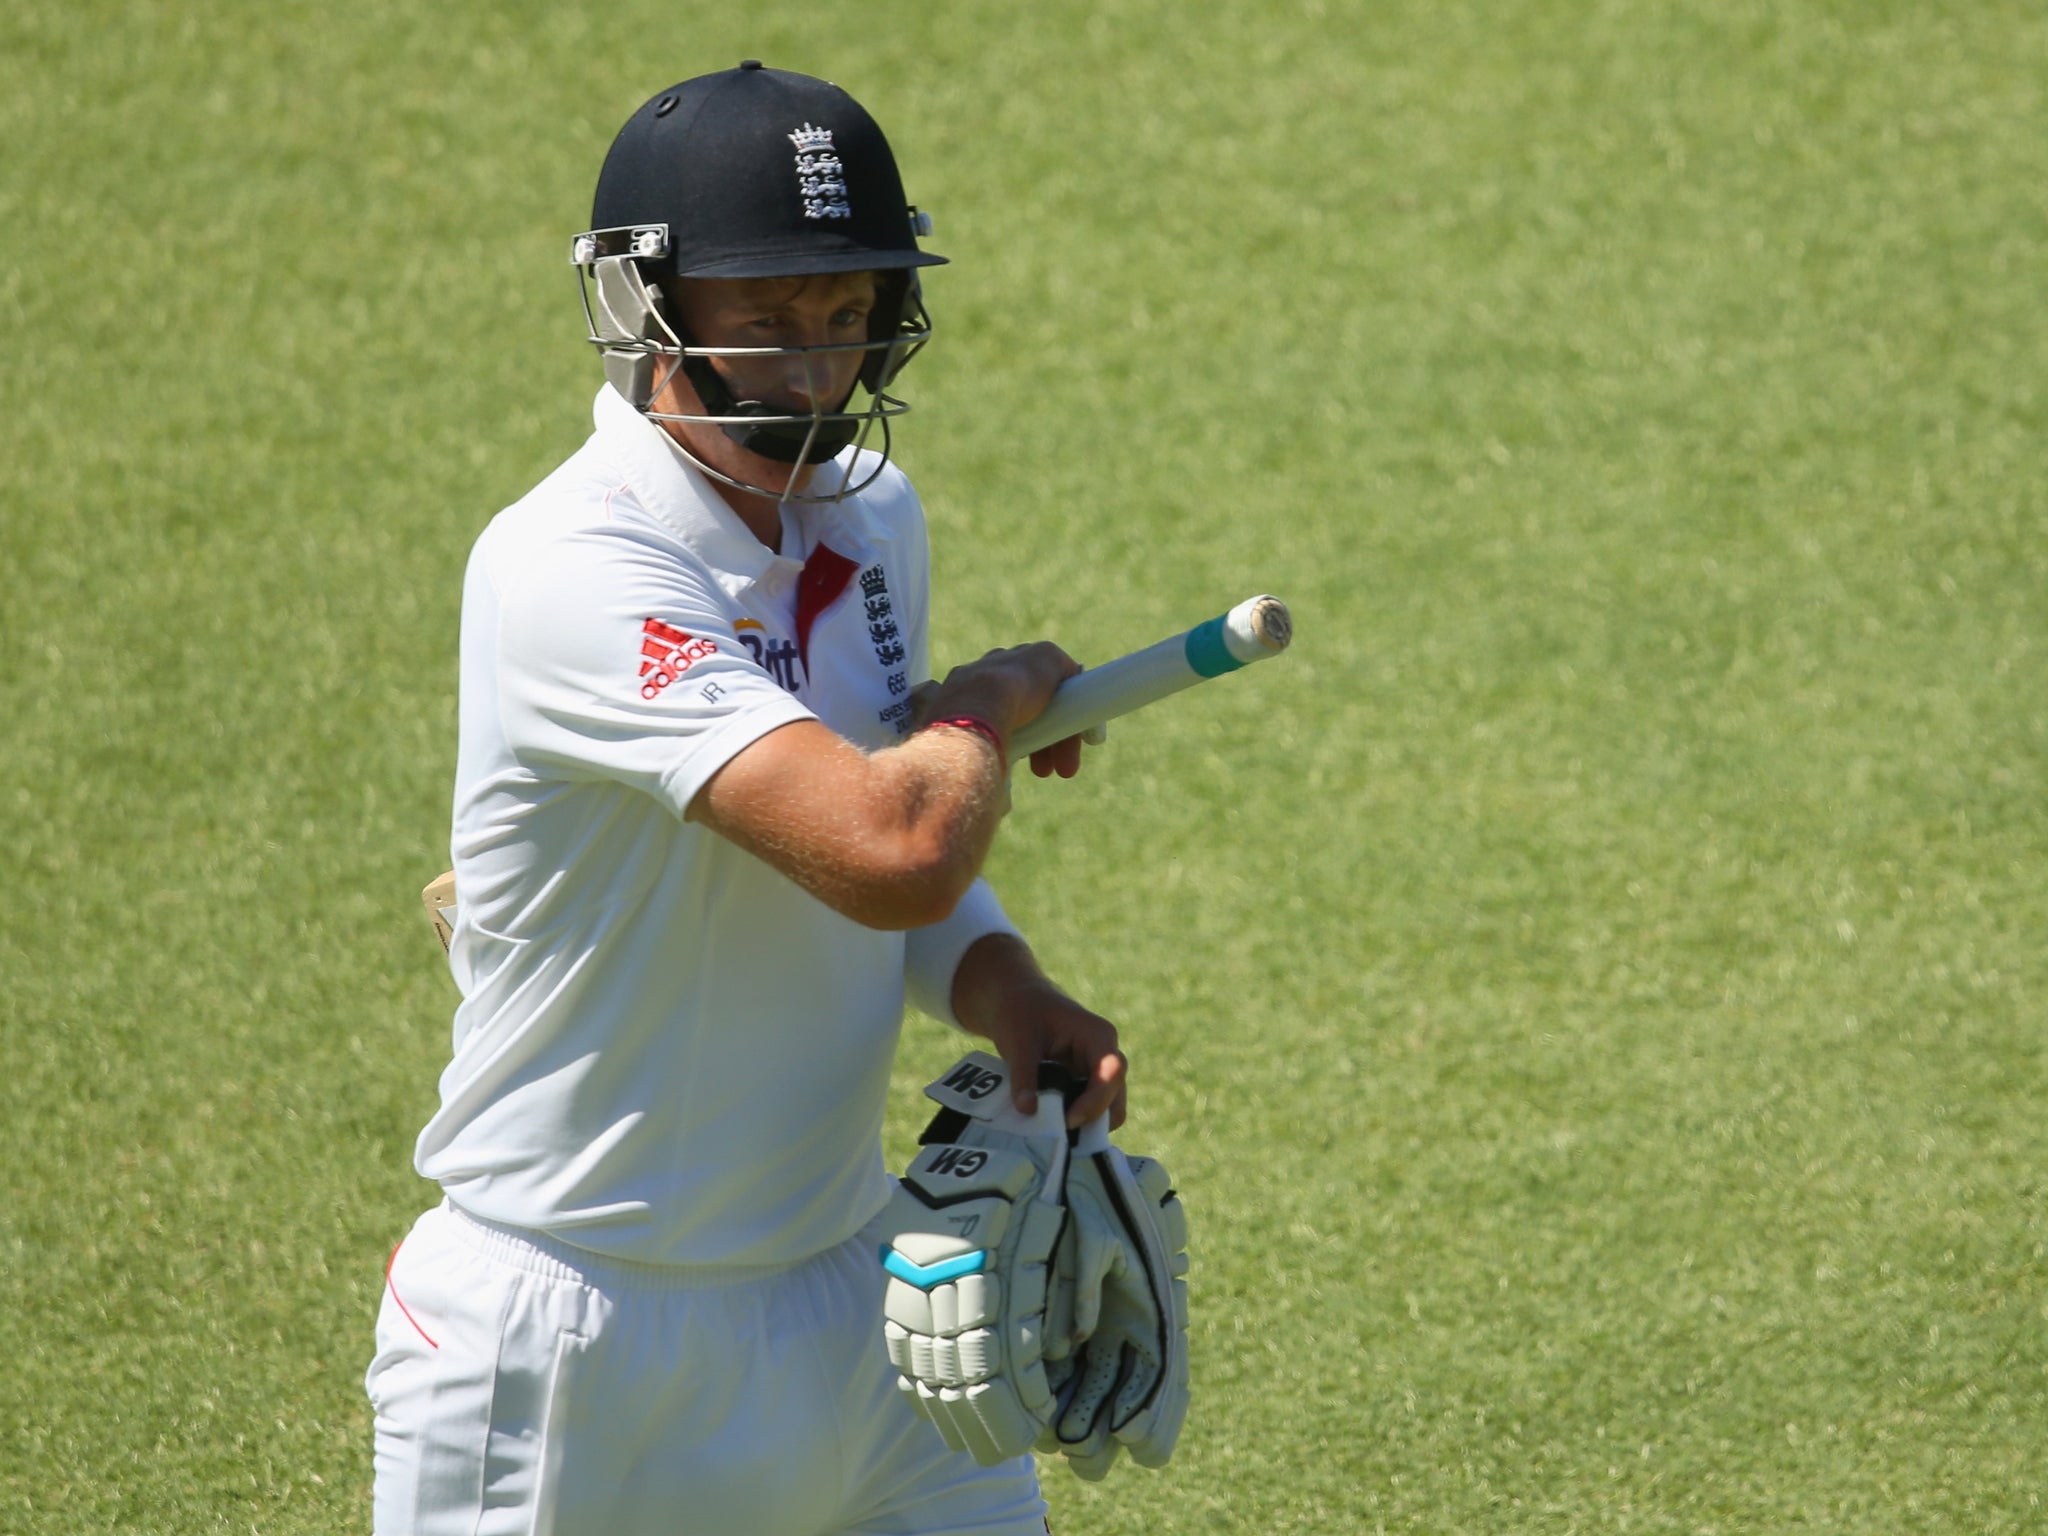 England batsman Joe Root was given out despite appearing to make no contact with the ball